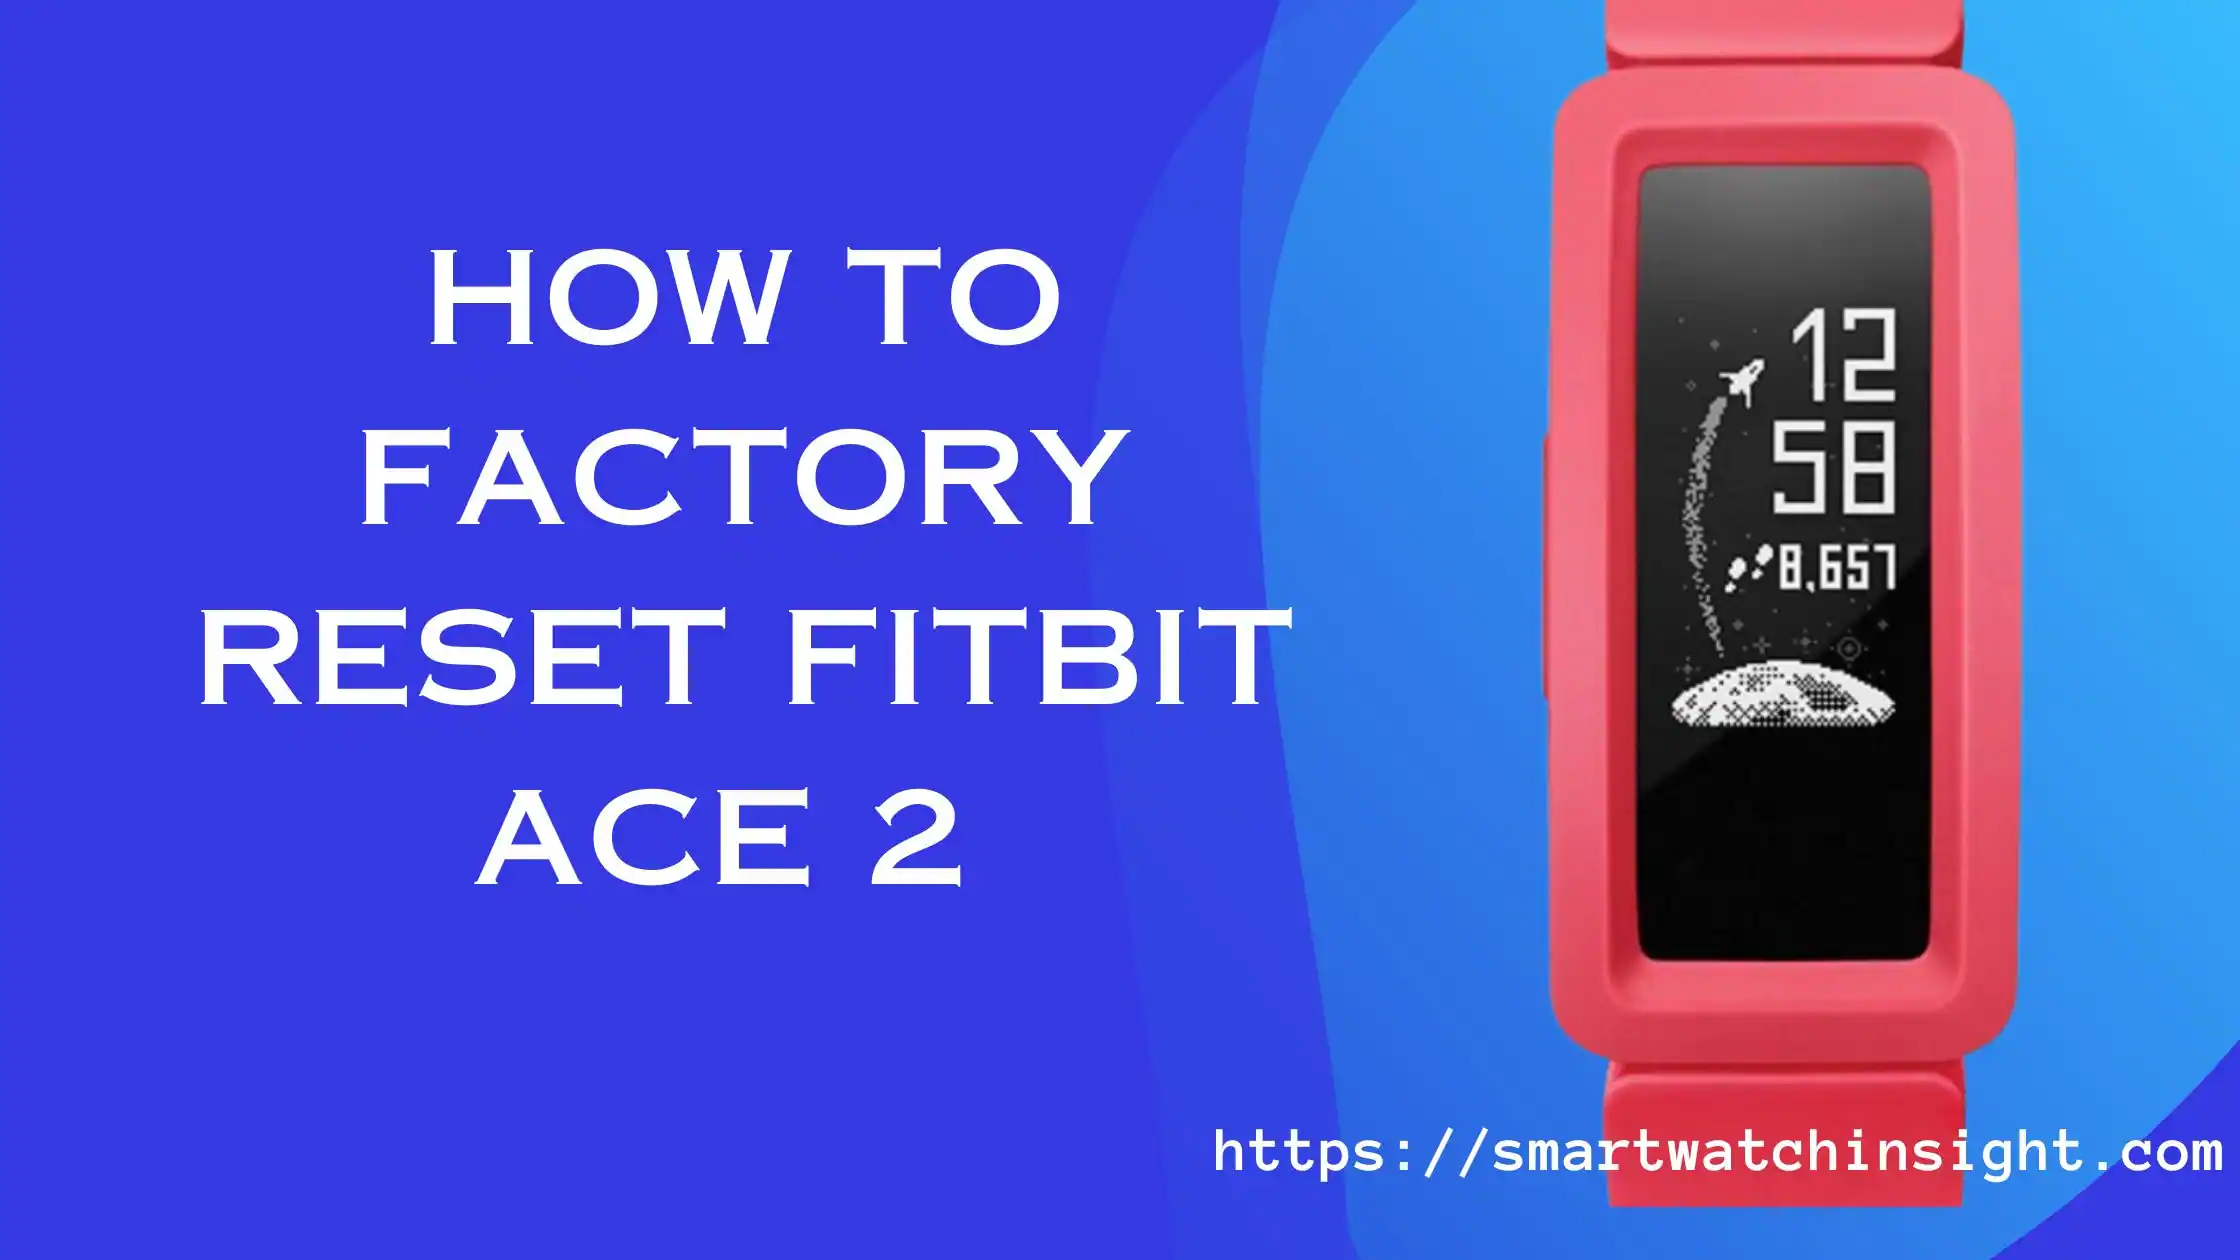 How to Factory Reset Fitbit Ace 2